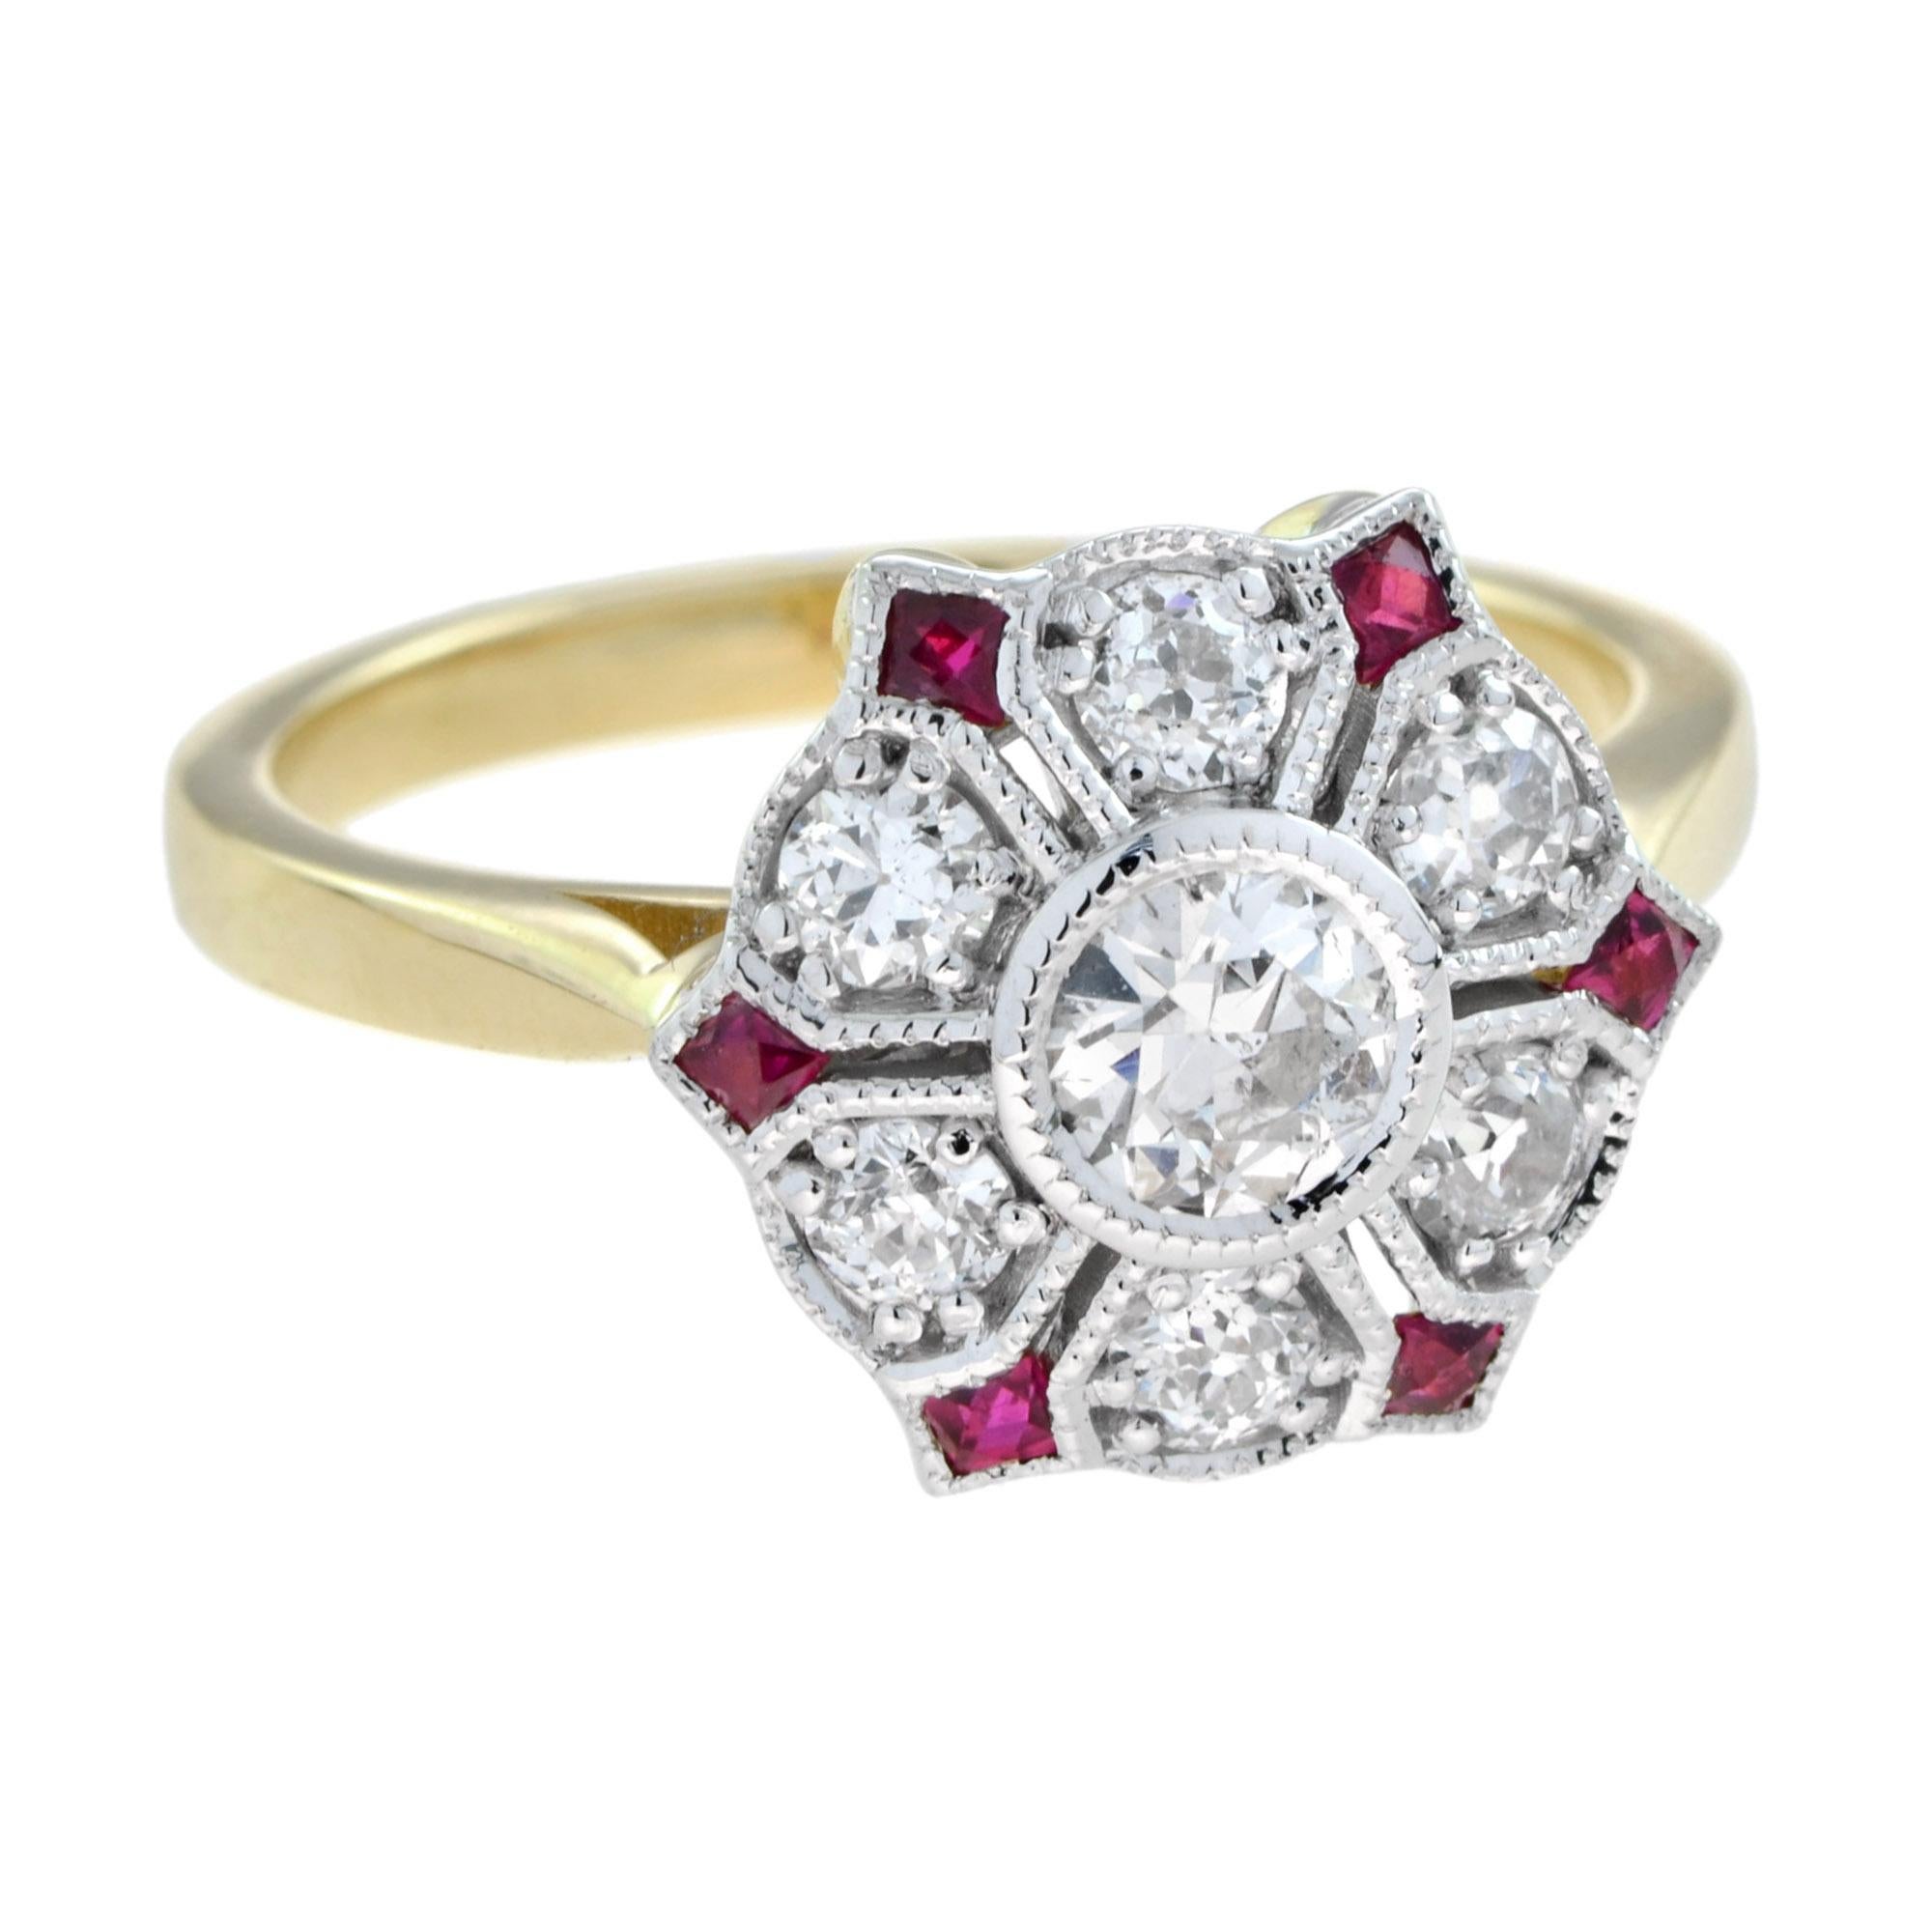 For Sale:  Diamond and Ruby Antique Style Floral Ring in 18k White Top Yellow Gold 4